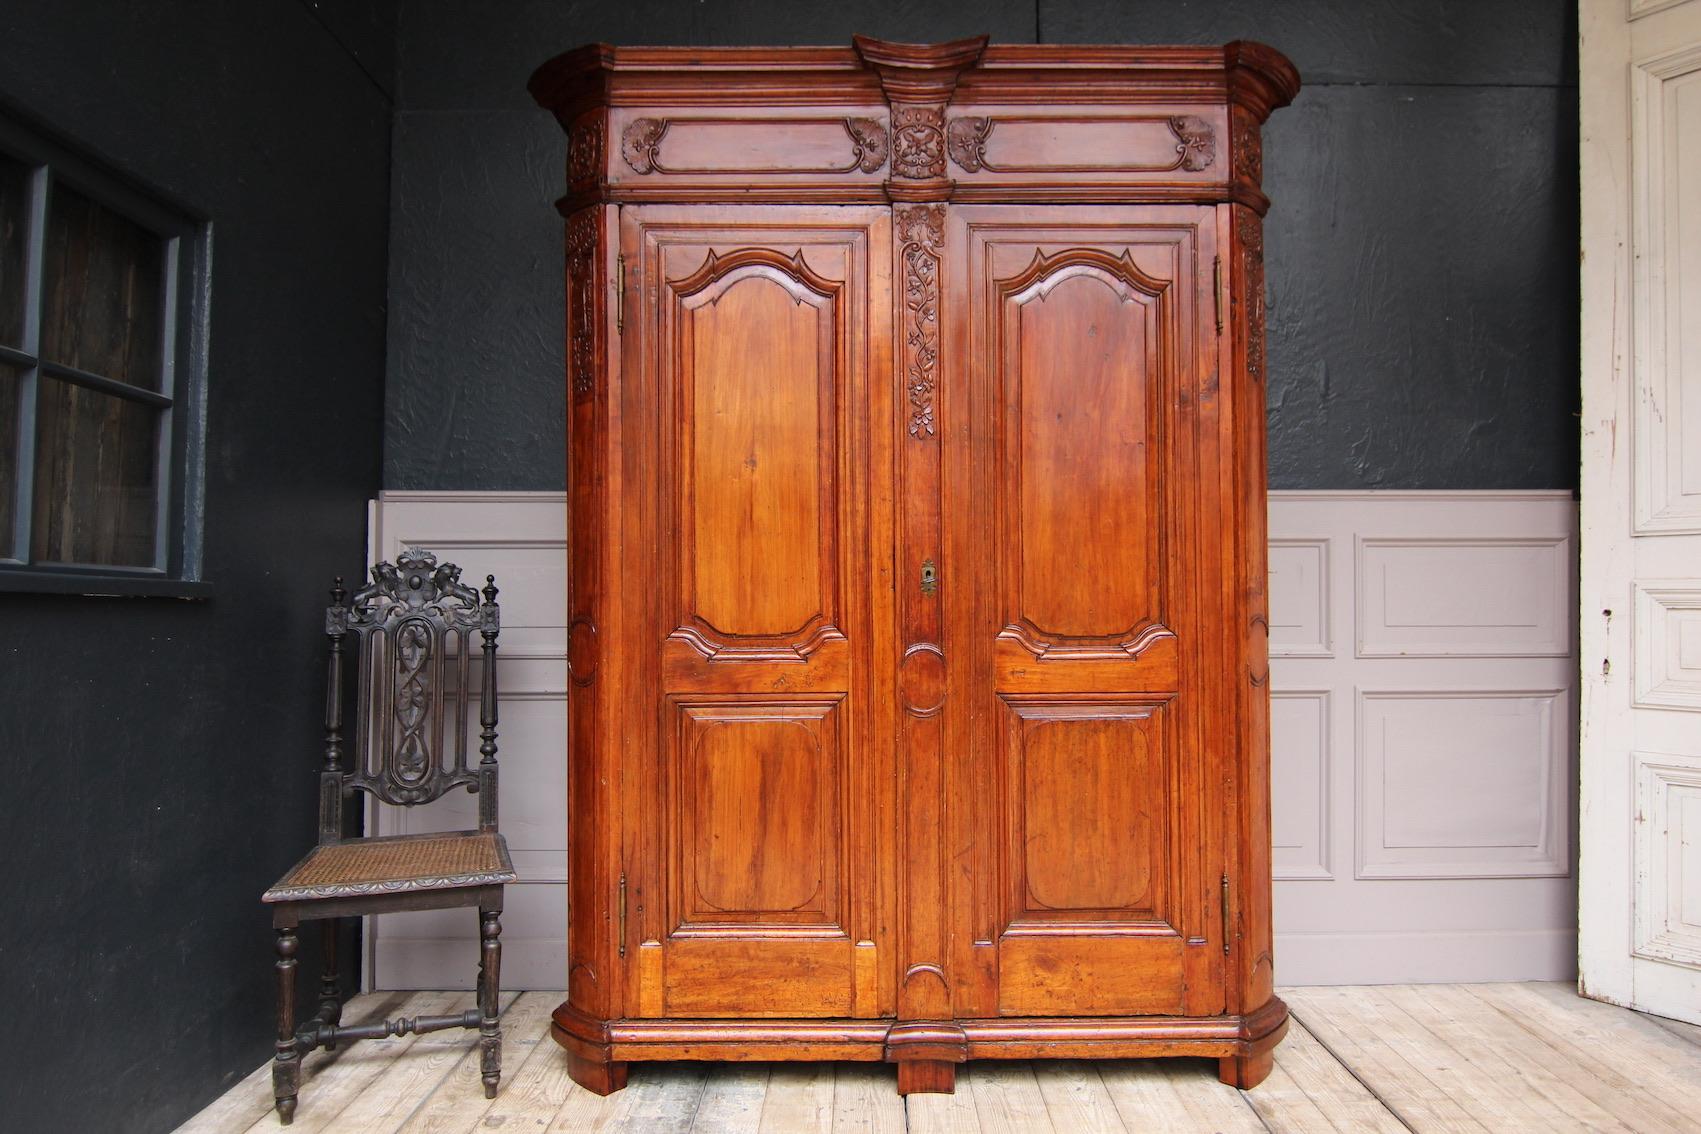 Original 18th century Liège wardrobe. Rare version in cherry wood.

Dismountable corpus with sloping rounded pilasters and heavy cornice with cranked profile. Two doors hung on external brass fittings. Both doors and sides of the corpus